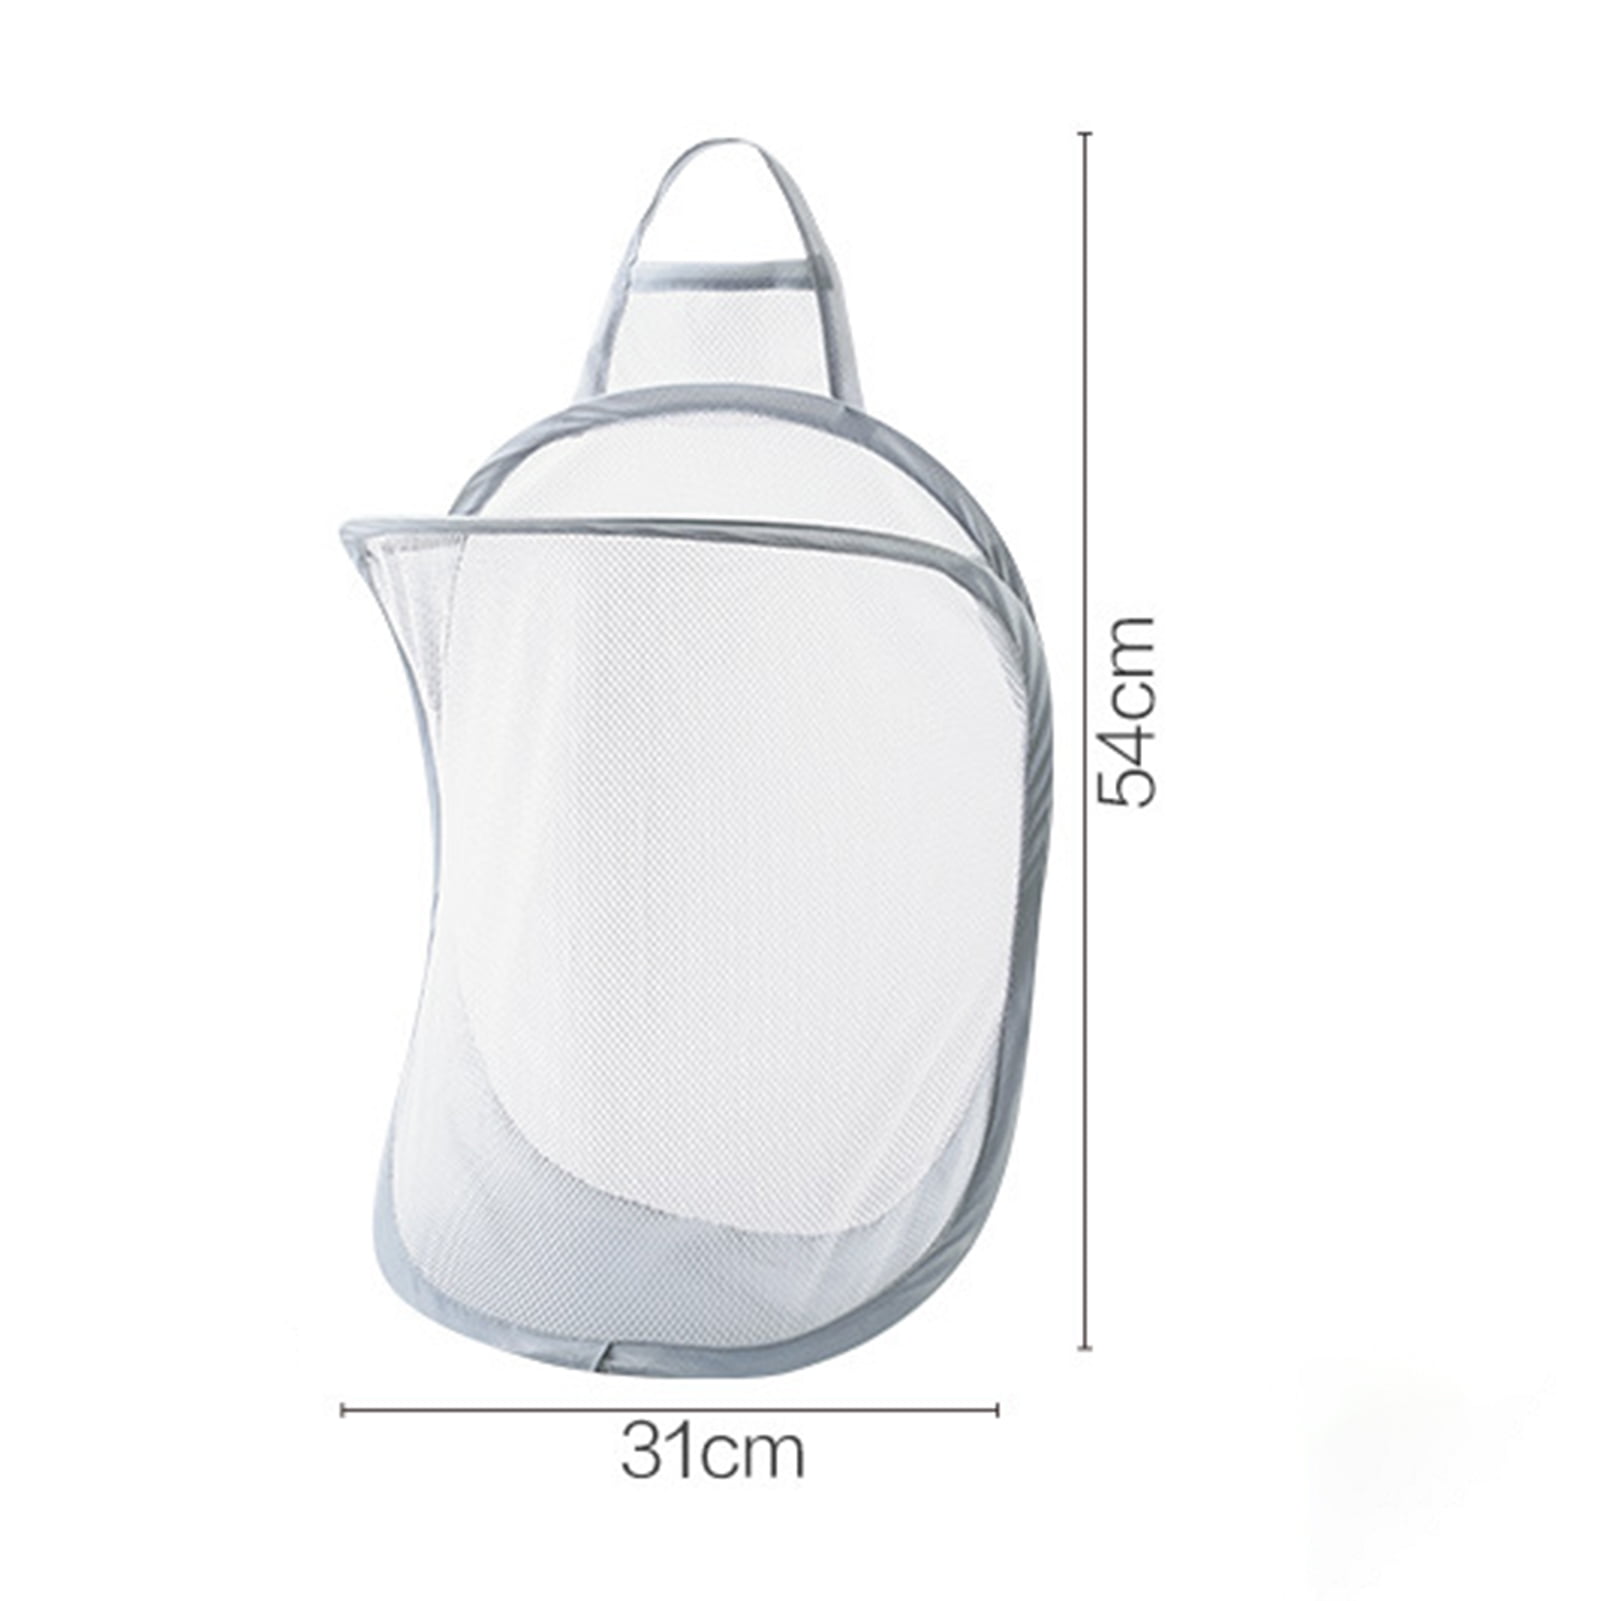 1pc Mesh Collapsible Small Wall Laundry Baskets,Hanging Laundry Hamper,for  Hotel, University Dormitory Use by HHSSALIN